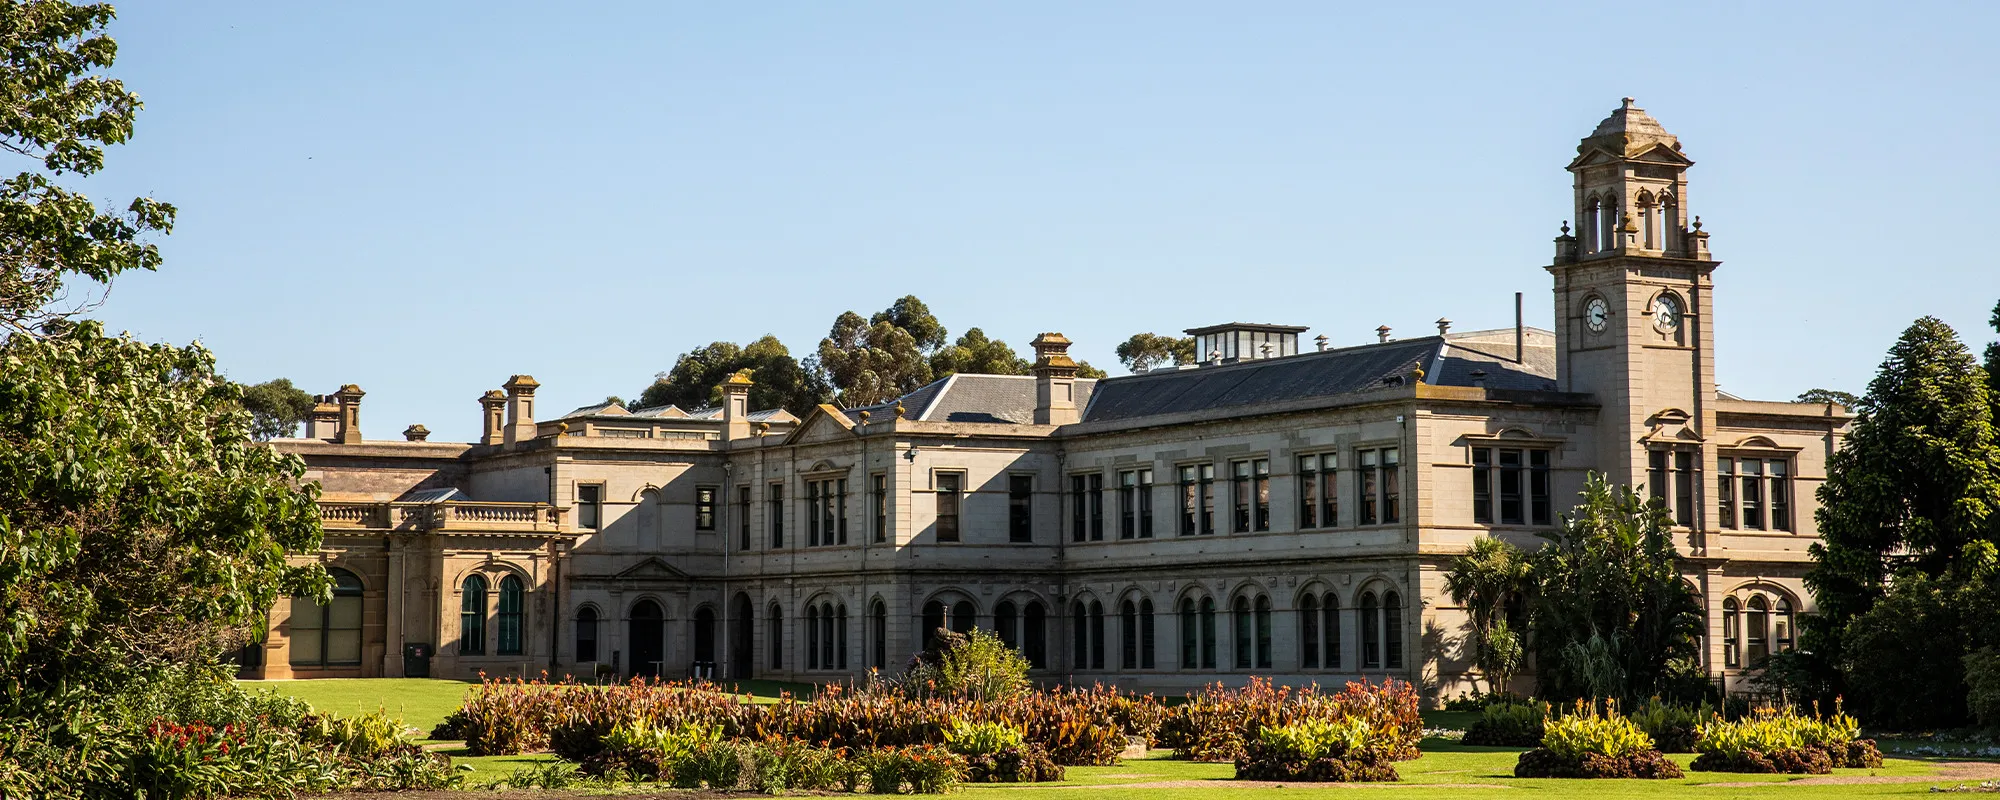 Lancemore Mansion Hotel Werribee Park Boutique Luxury Accommodation Facility grounds 2000 x 800 2